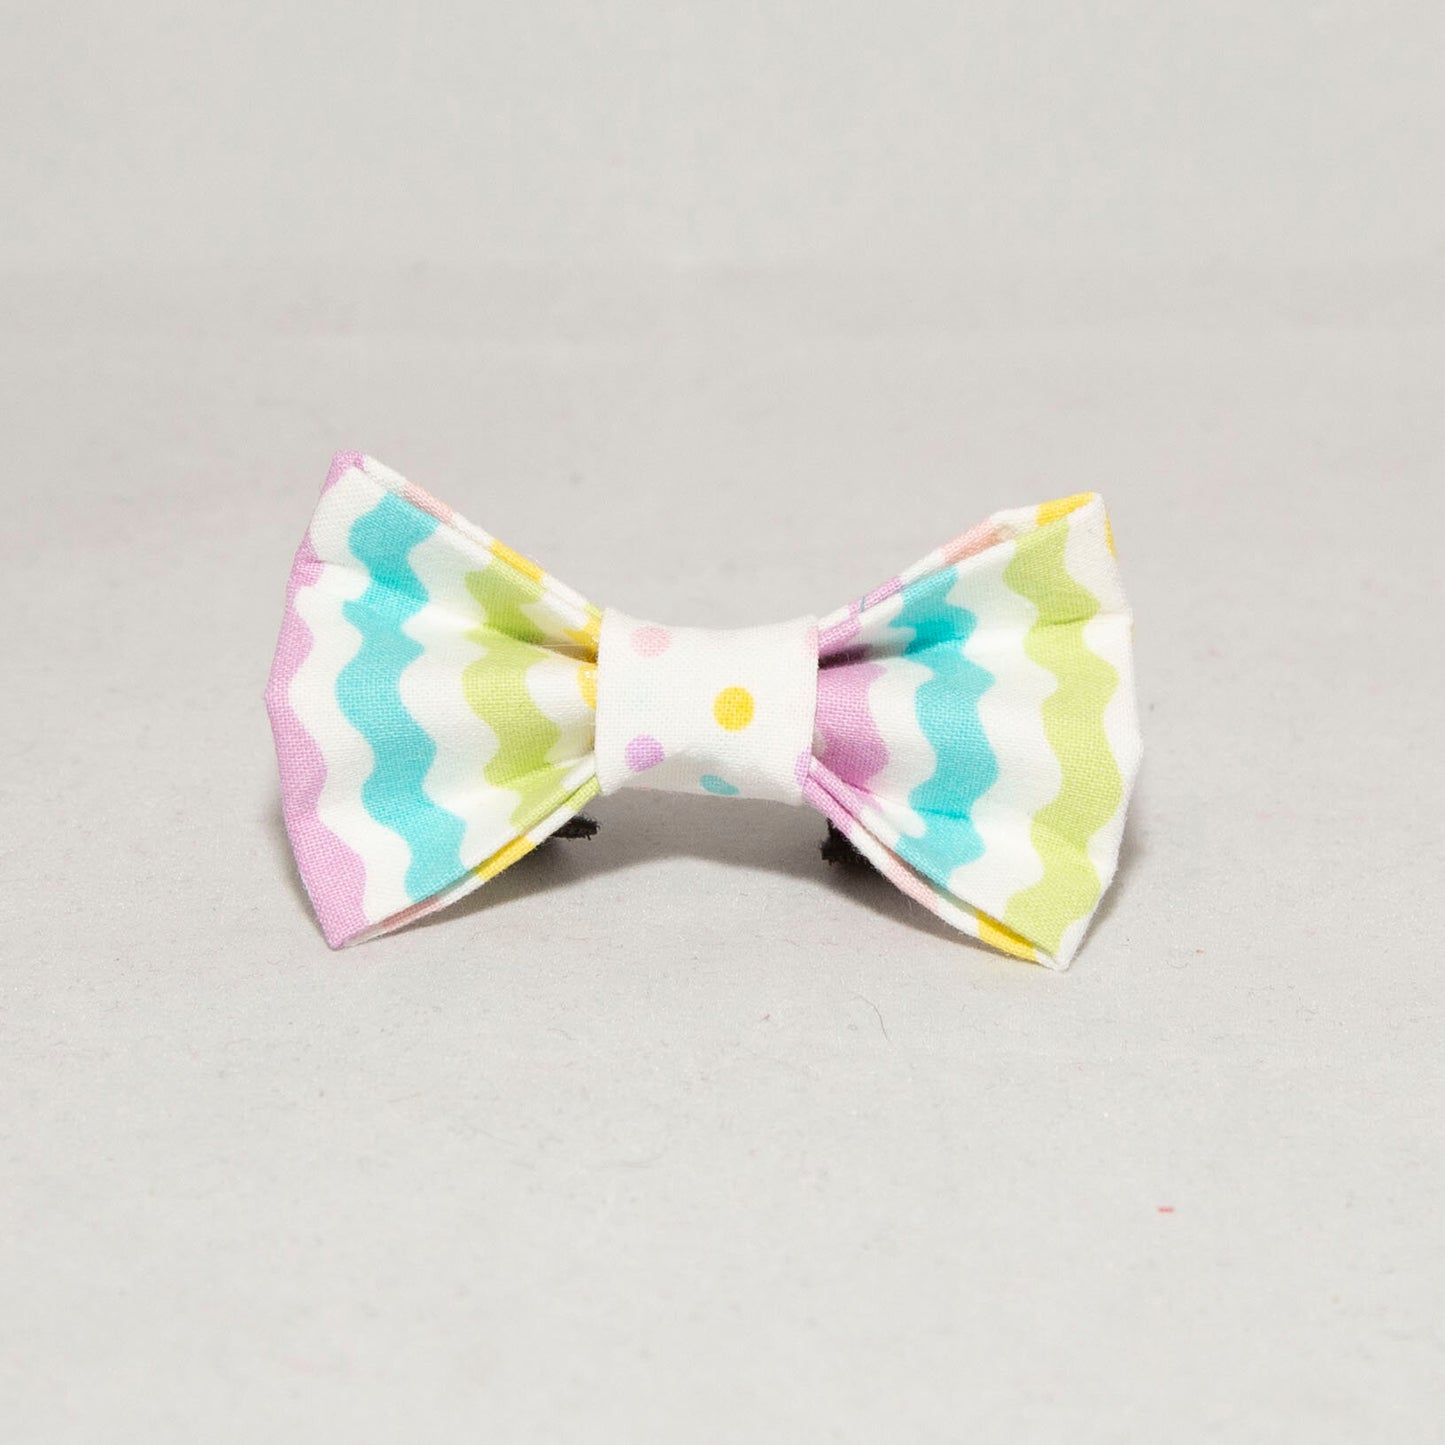 Spring/Easter Stripes and Polka Dots Dog Bow Ties